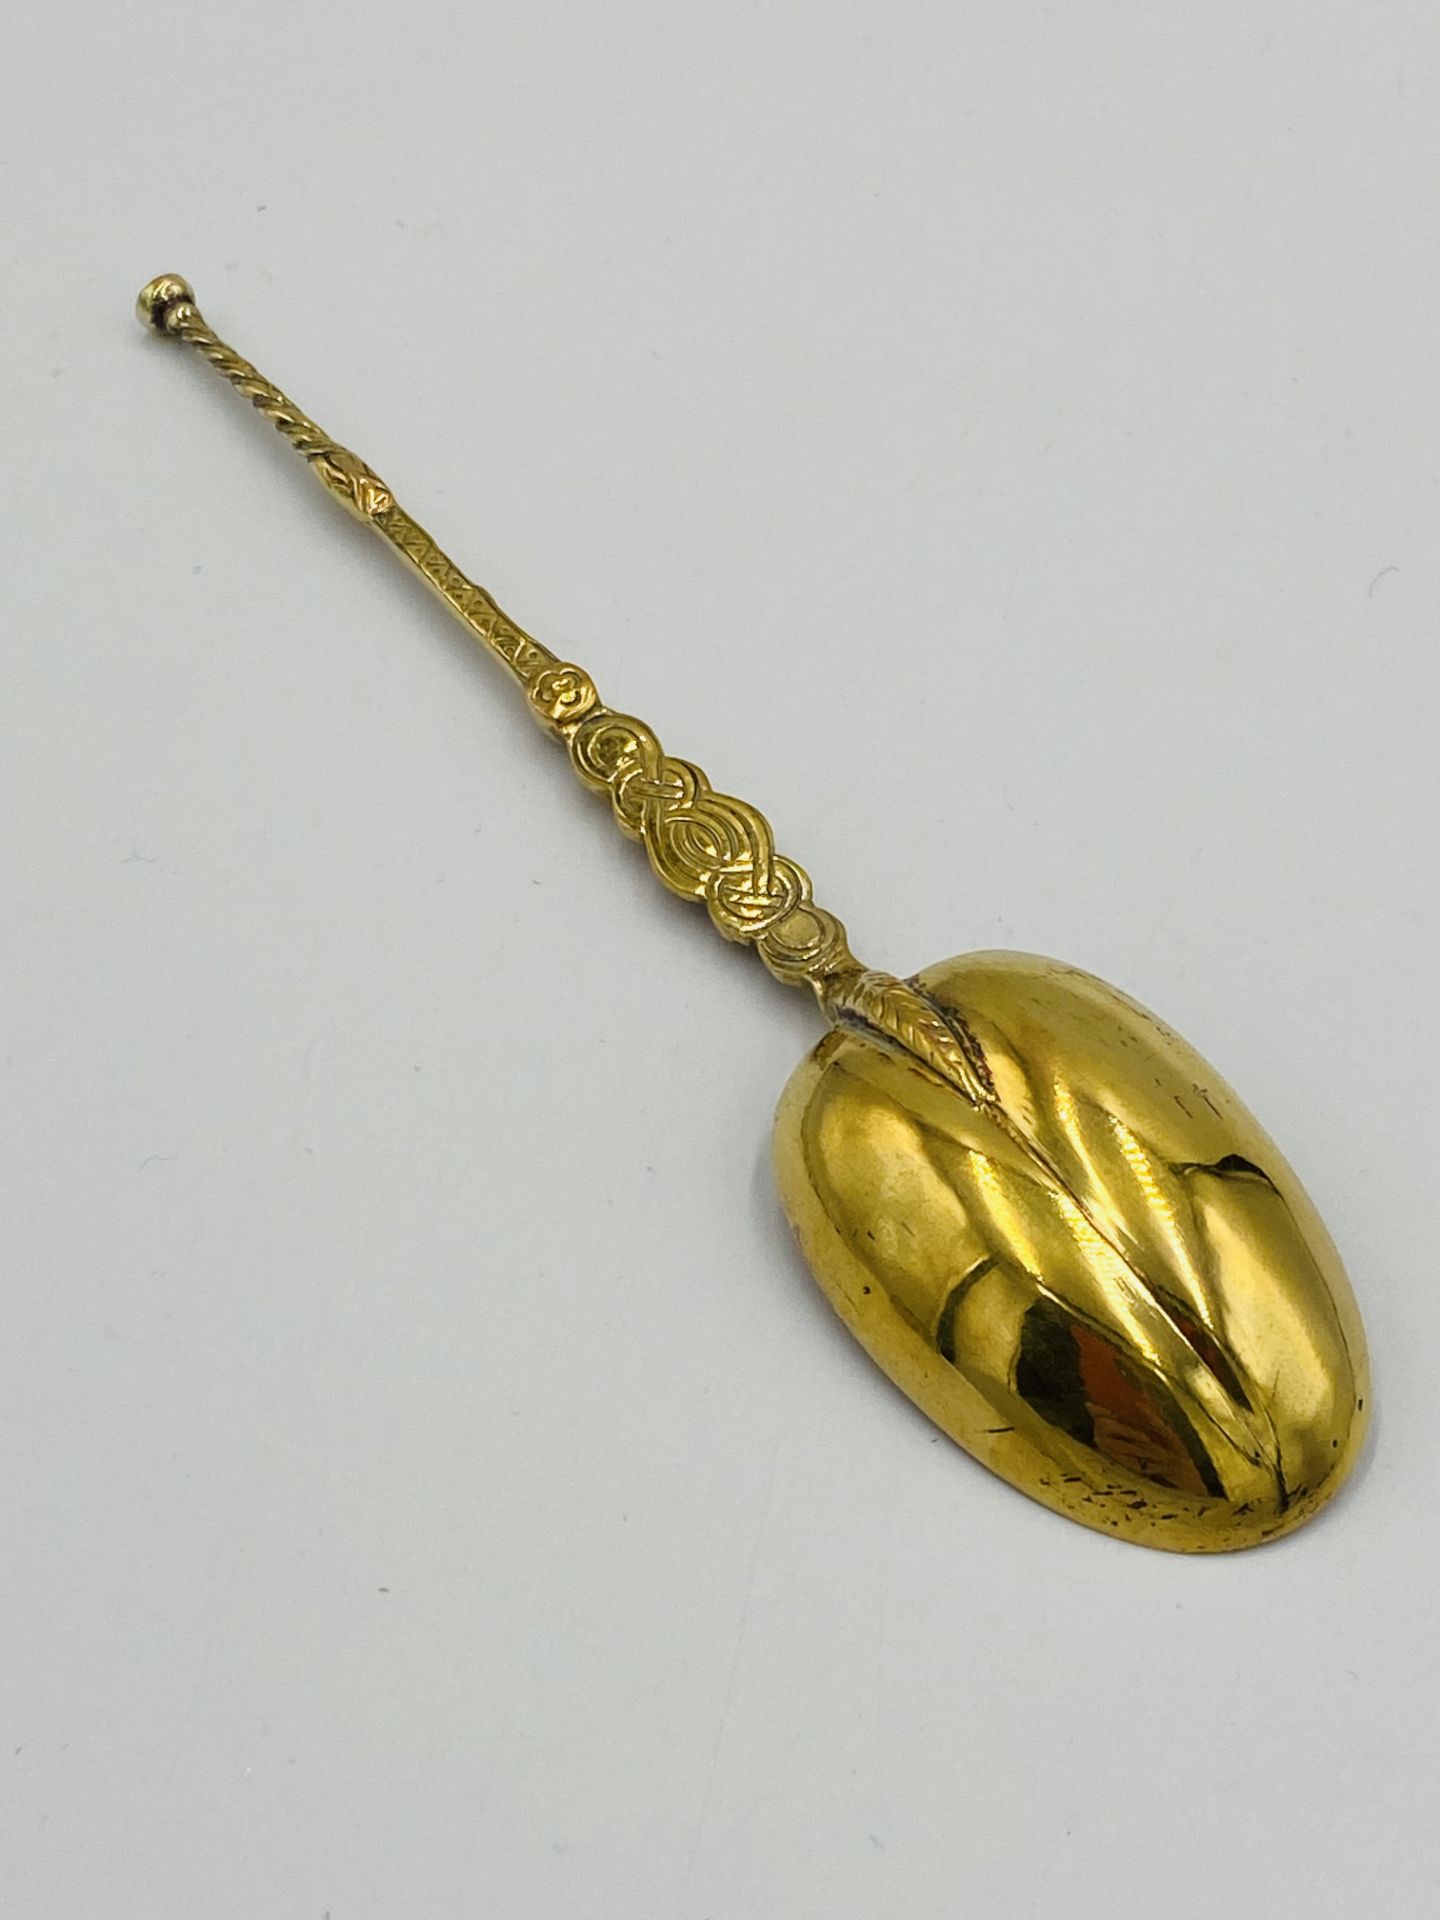 Silver gilt anointing set in box - Image 6 of 7